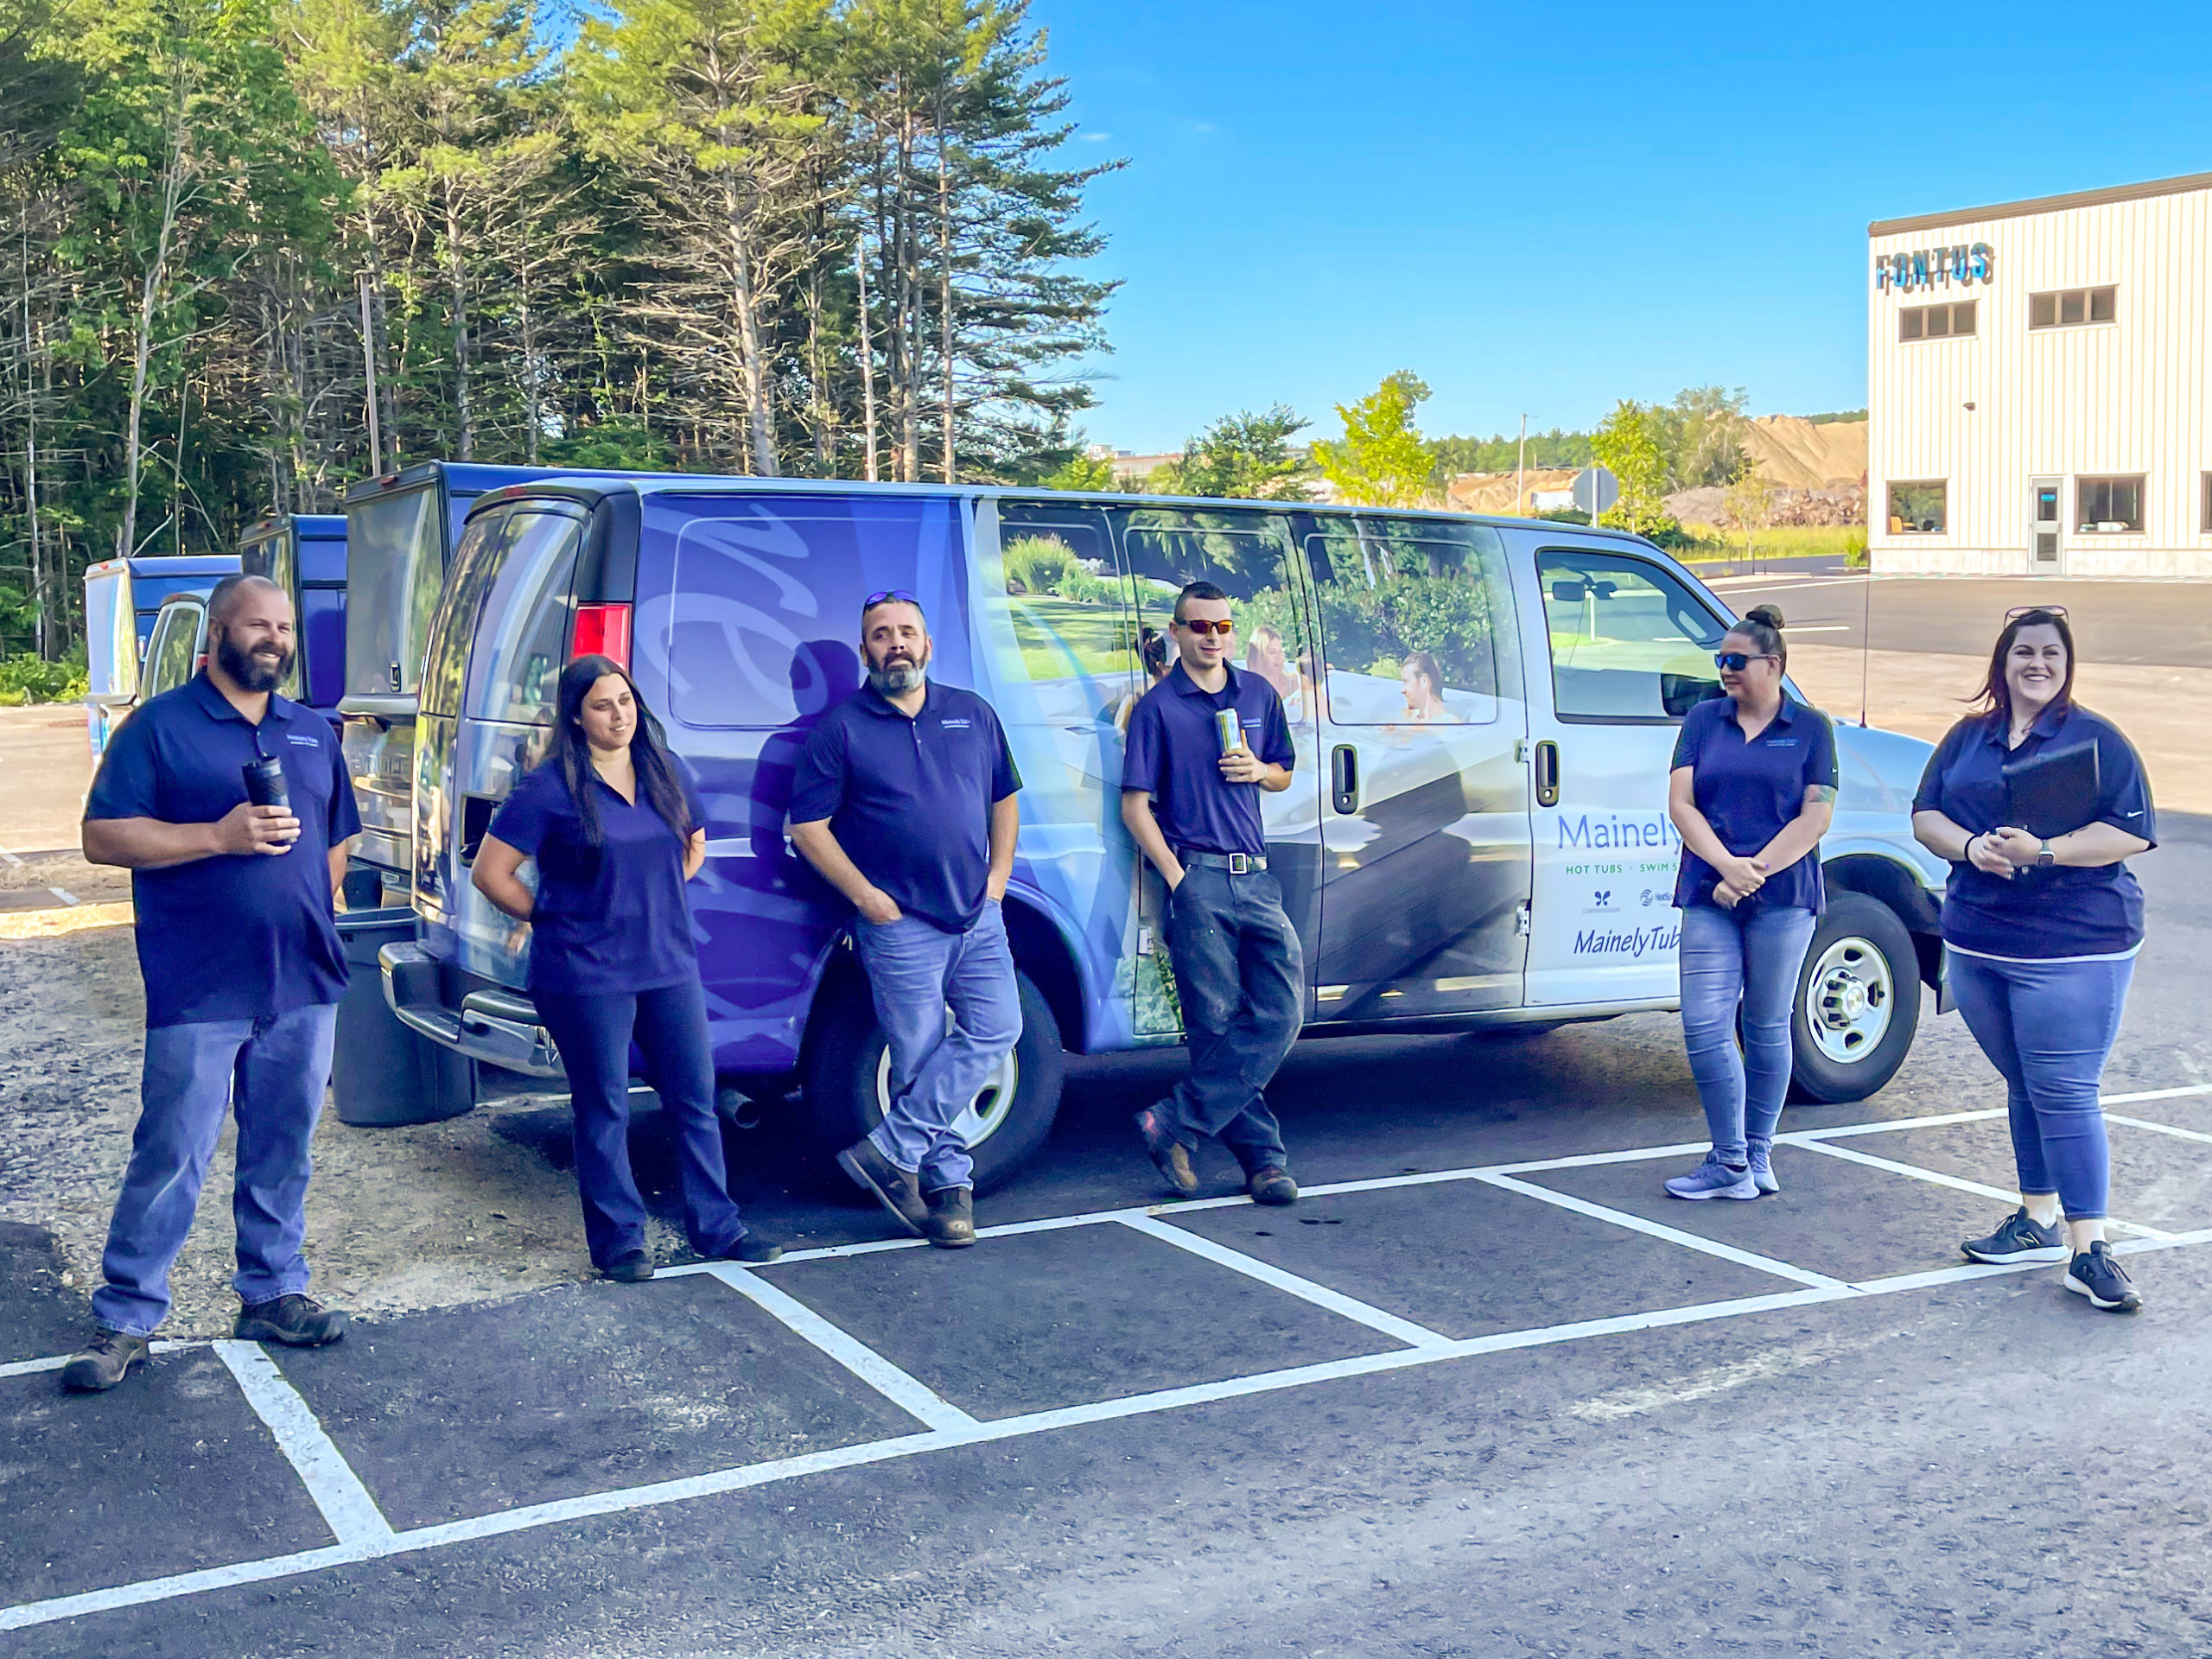 A group of service technicians standing outside in front of a service van.